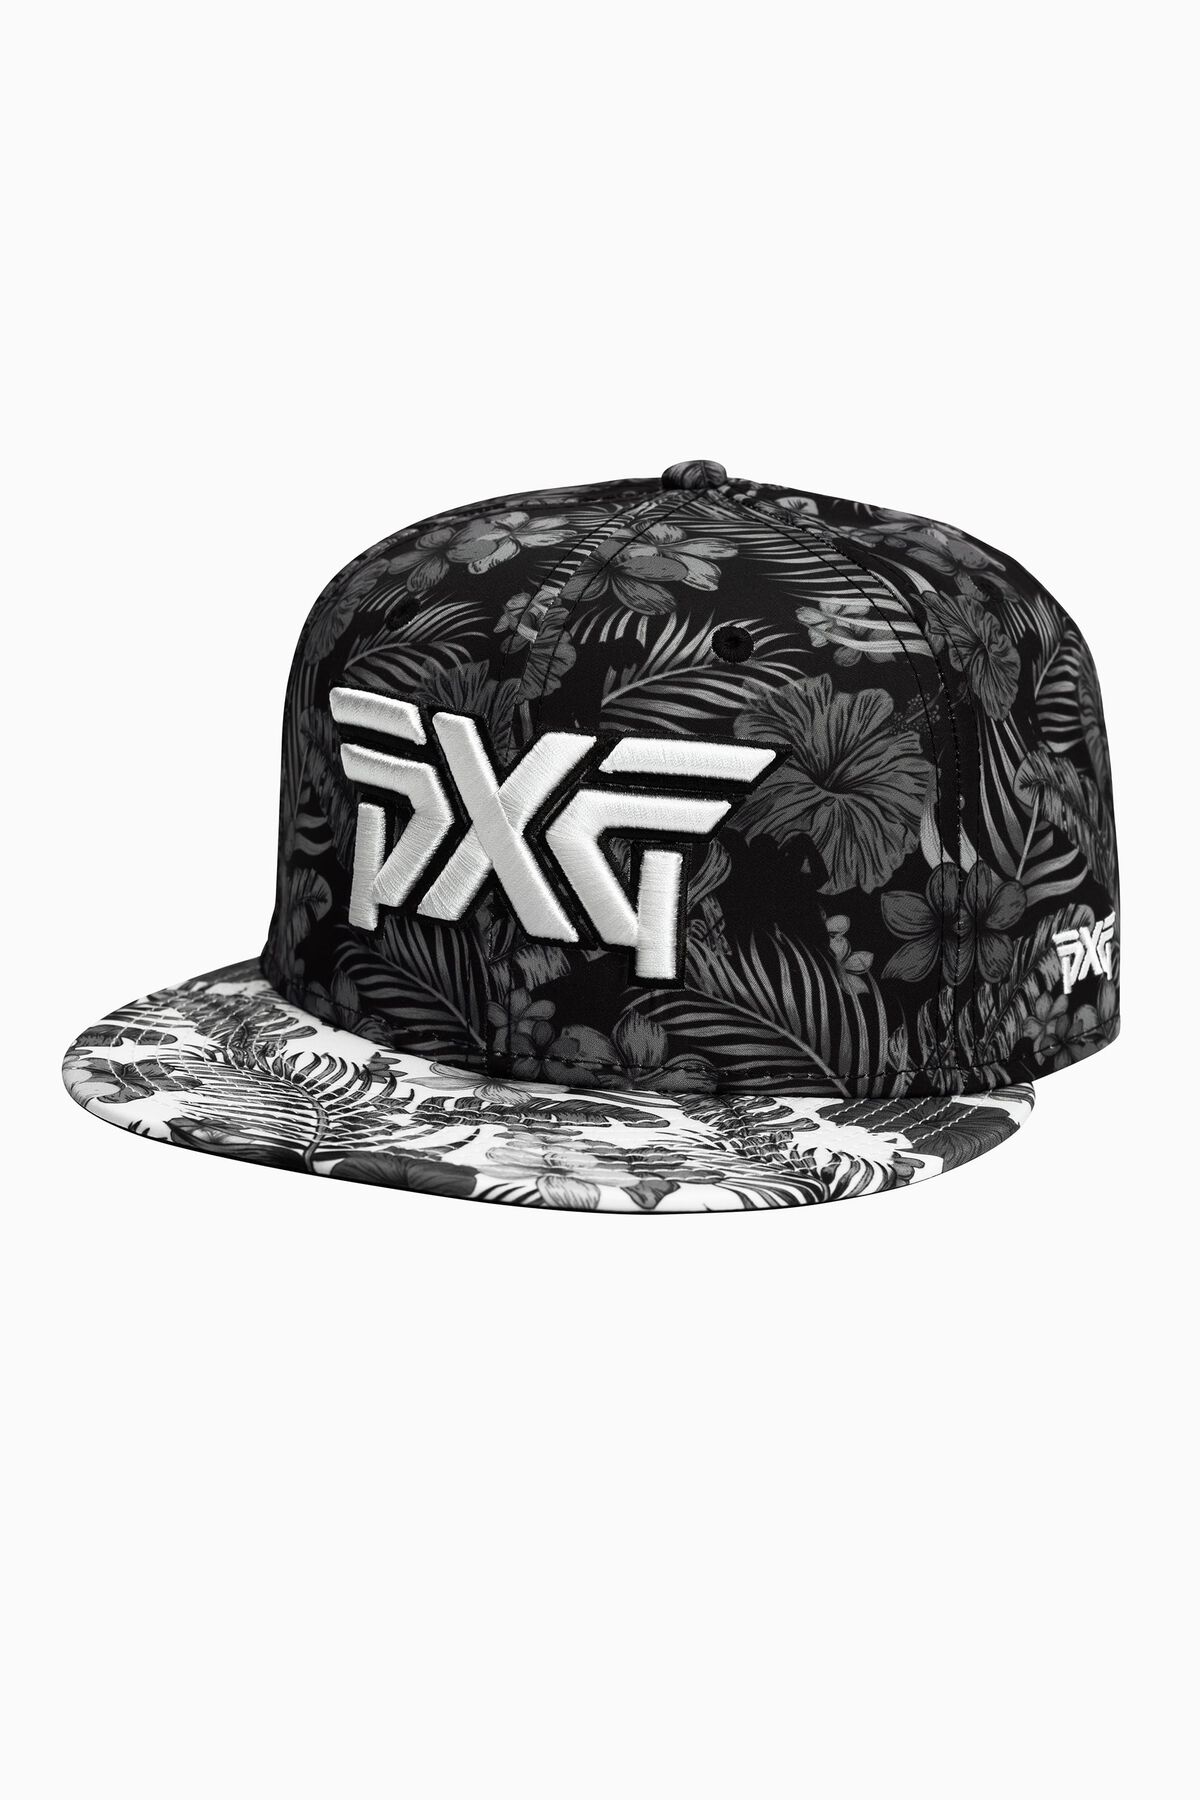 Aloha 2022 59FIFTY Fitted Cap  Shop the Highest Quality Golf Apparel,  Gear, Accessories and Golf Clubs at PXG